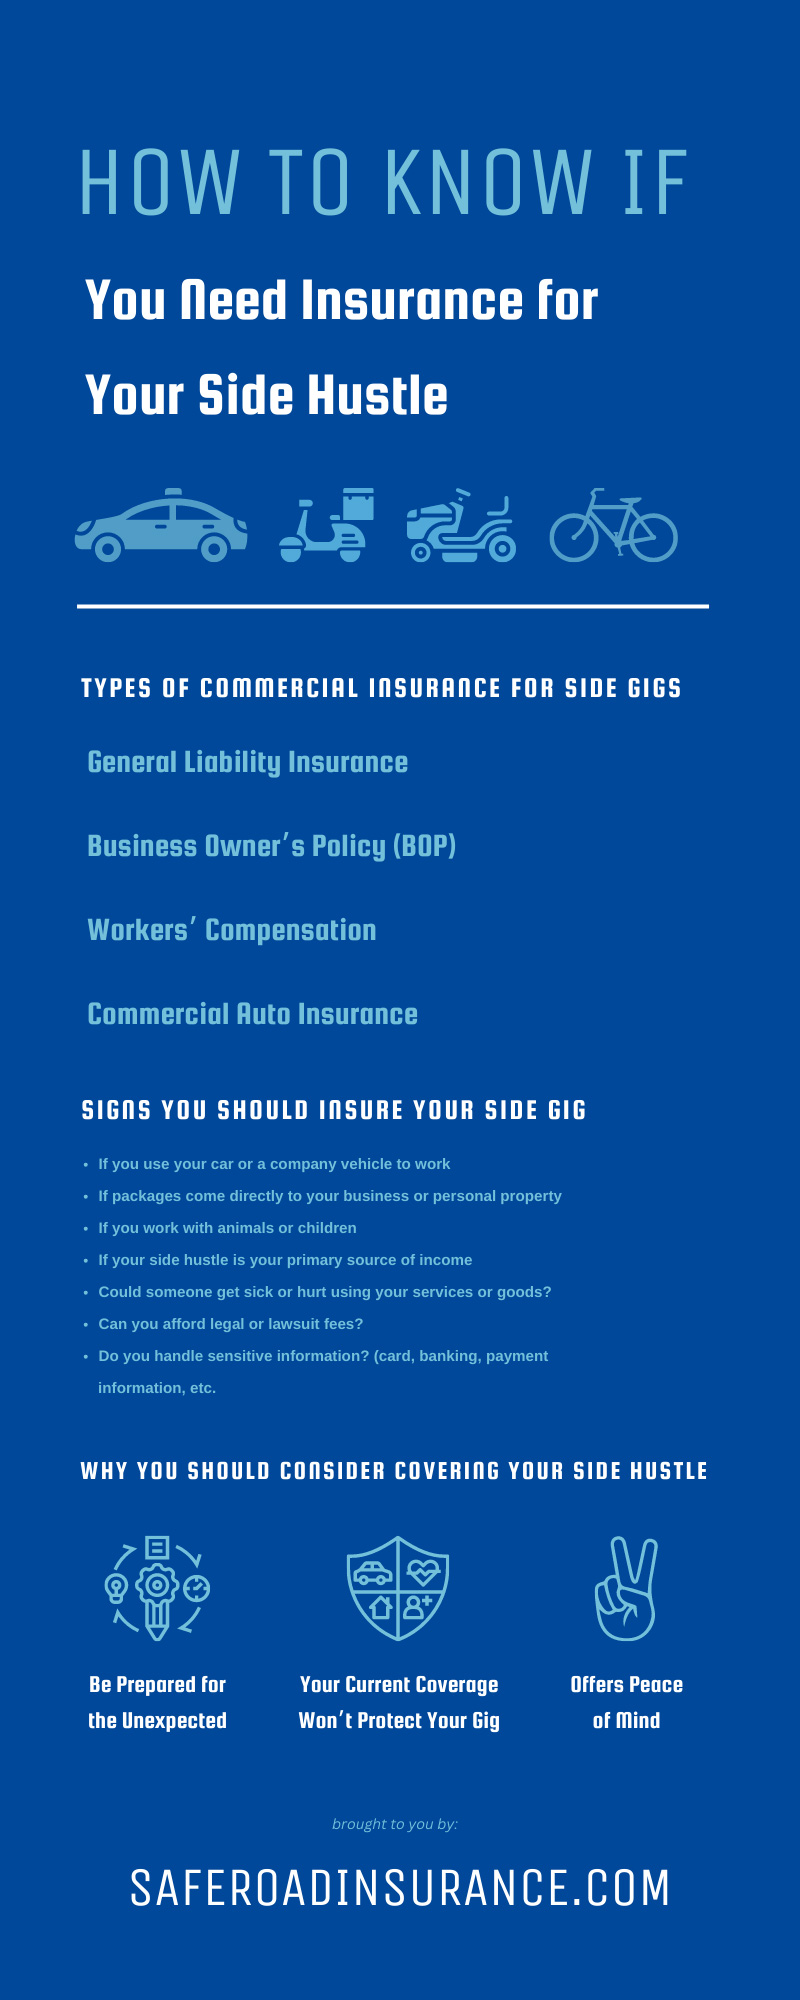 How To Know if You Need Insurance for Your Side Hustle